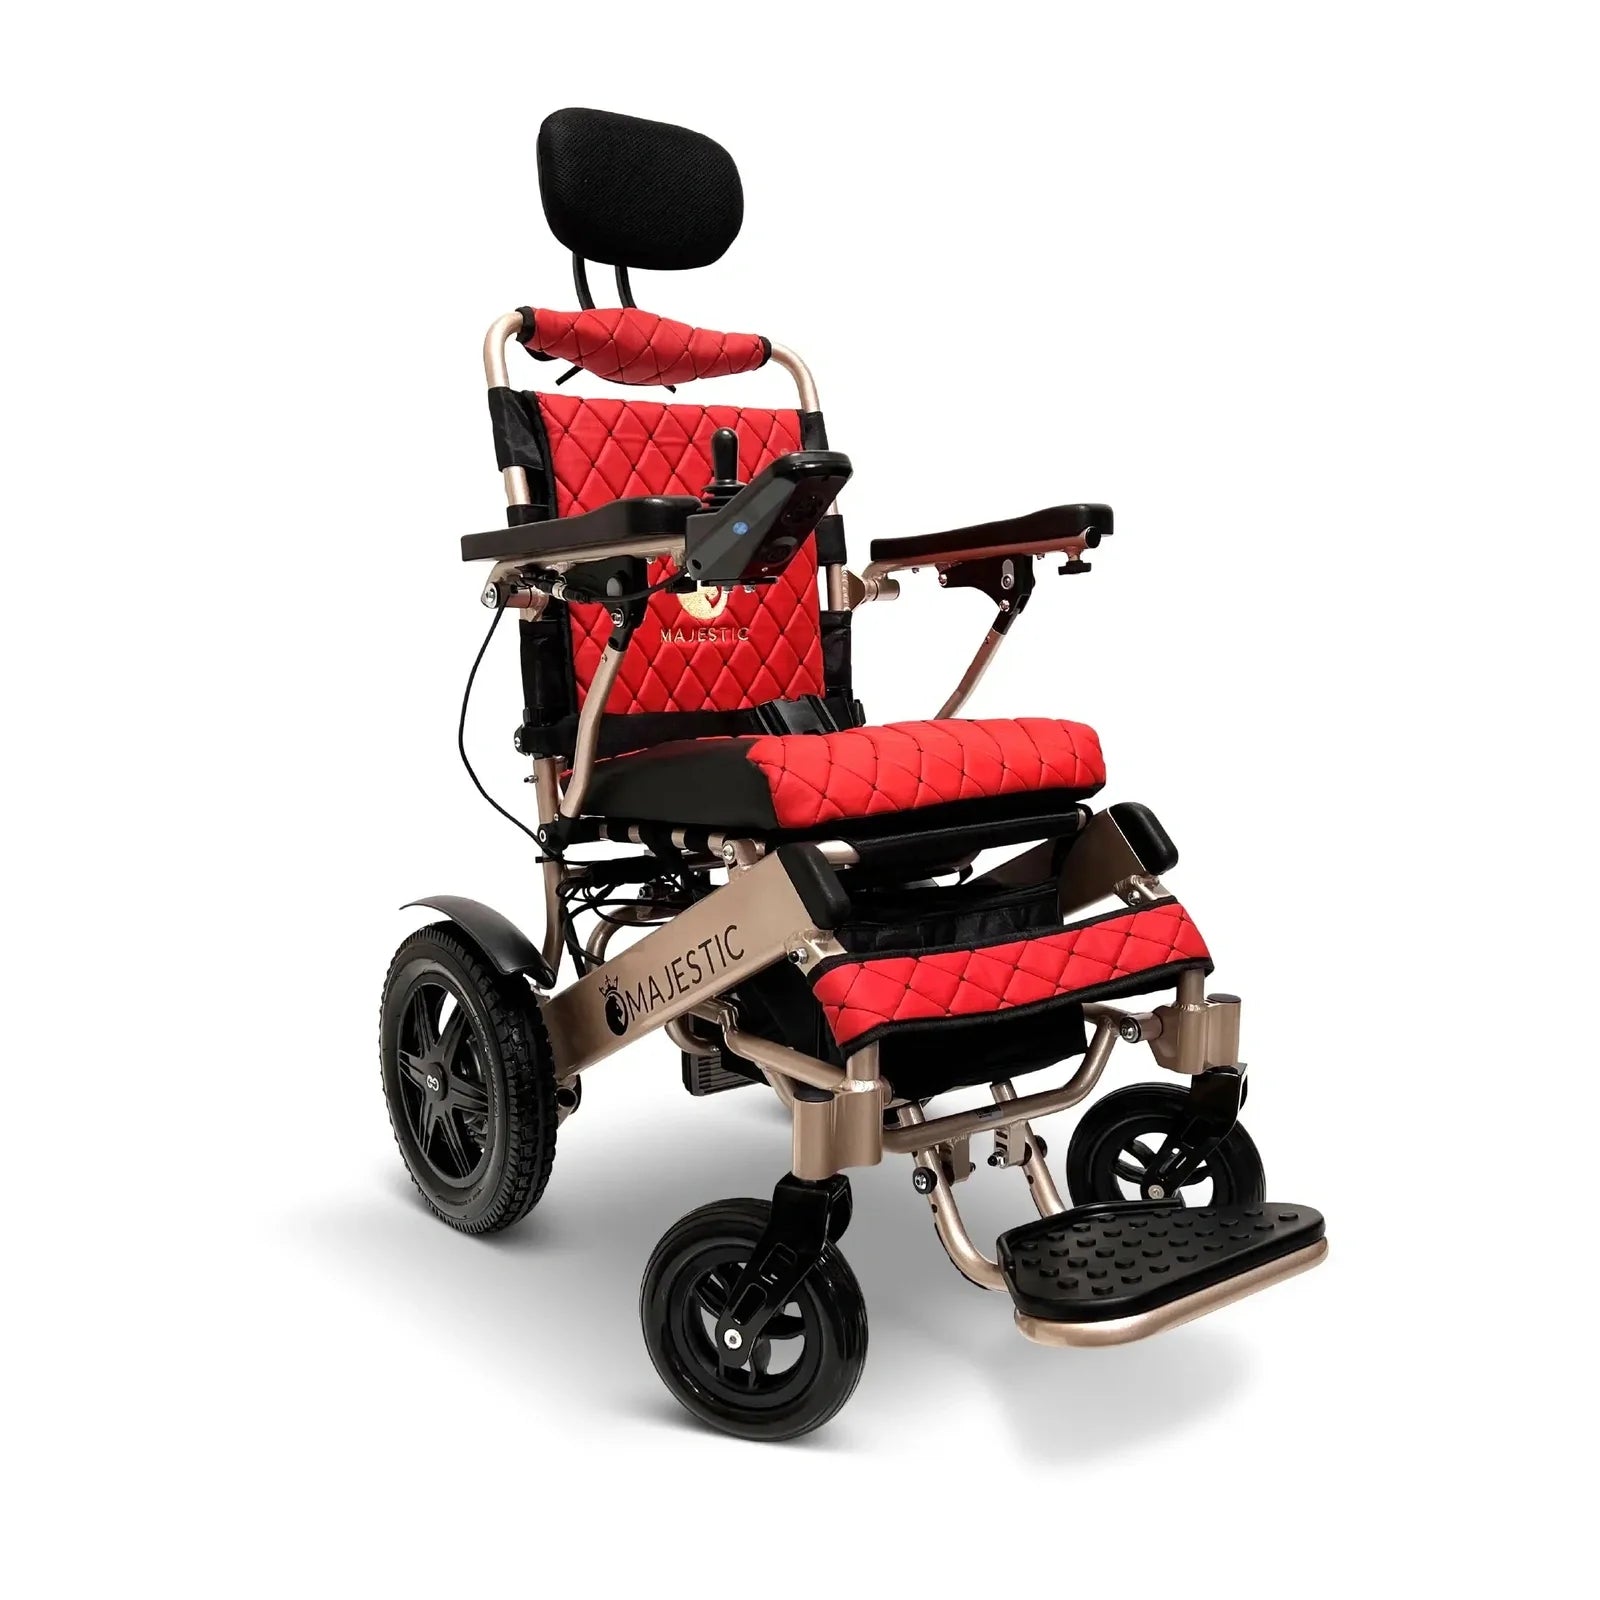 ComfyGO Majestic IQ-9000 Long Range Remote Controlled Folding Reclining Electric Wheelchair Power Wheelchairs ComfyGO Bronze Red Auto Reclining